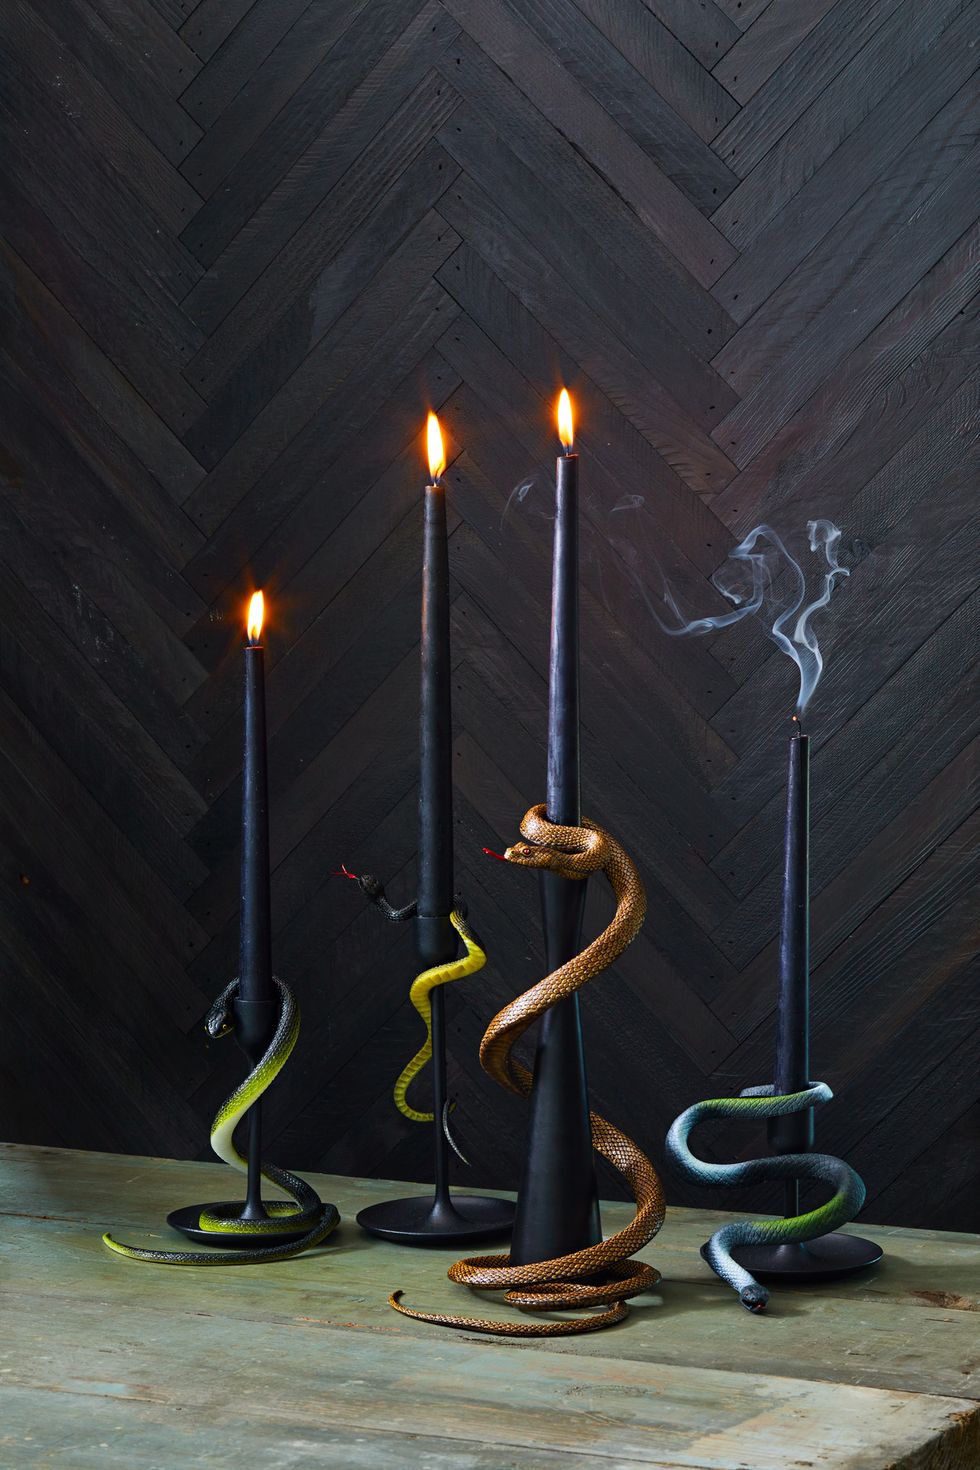 diy halloween decor slither smoke candles black candlesticks with wrapped with plastic toy snakes spooky season